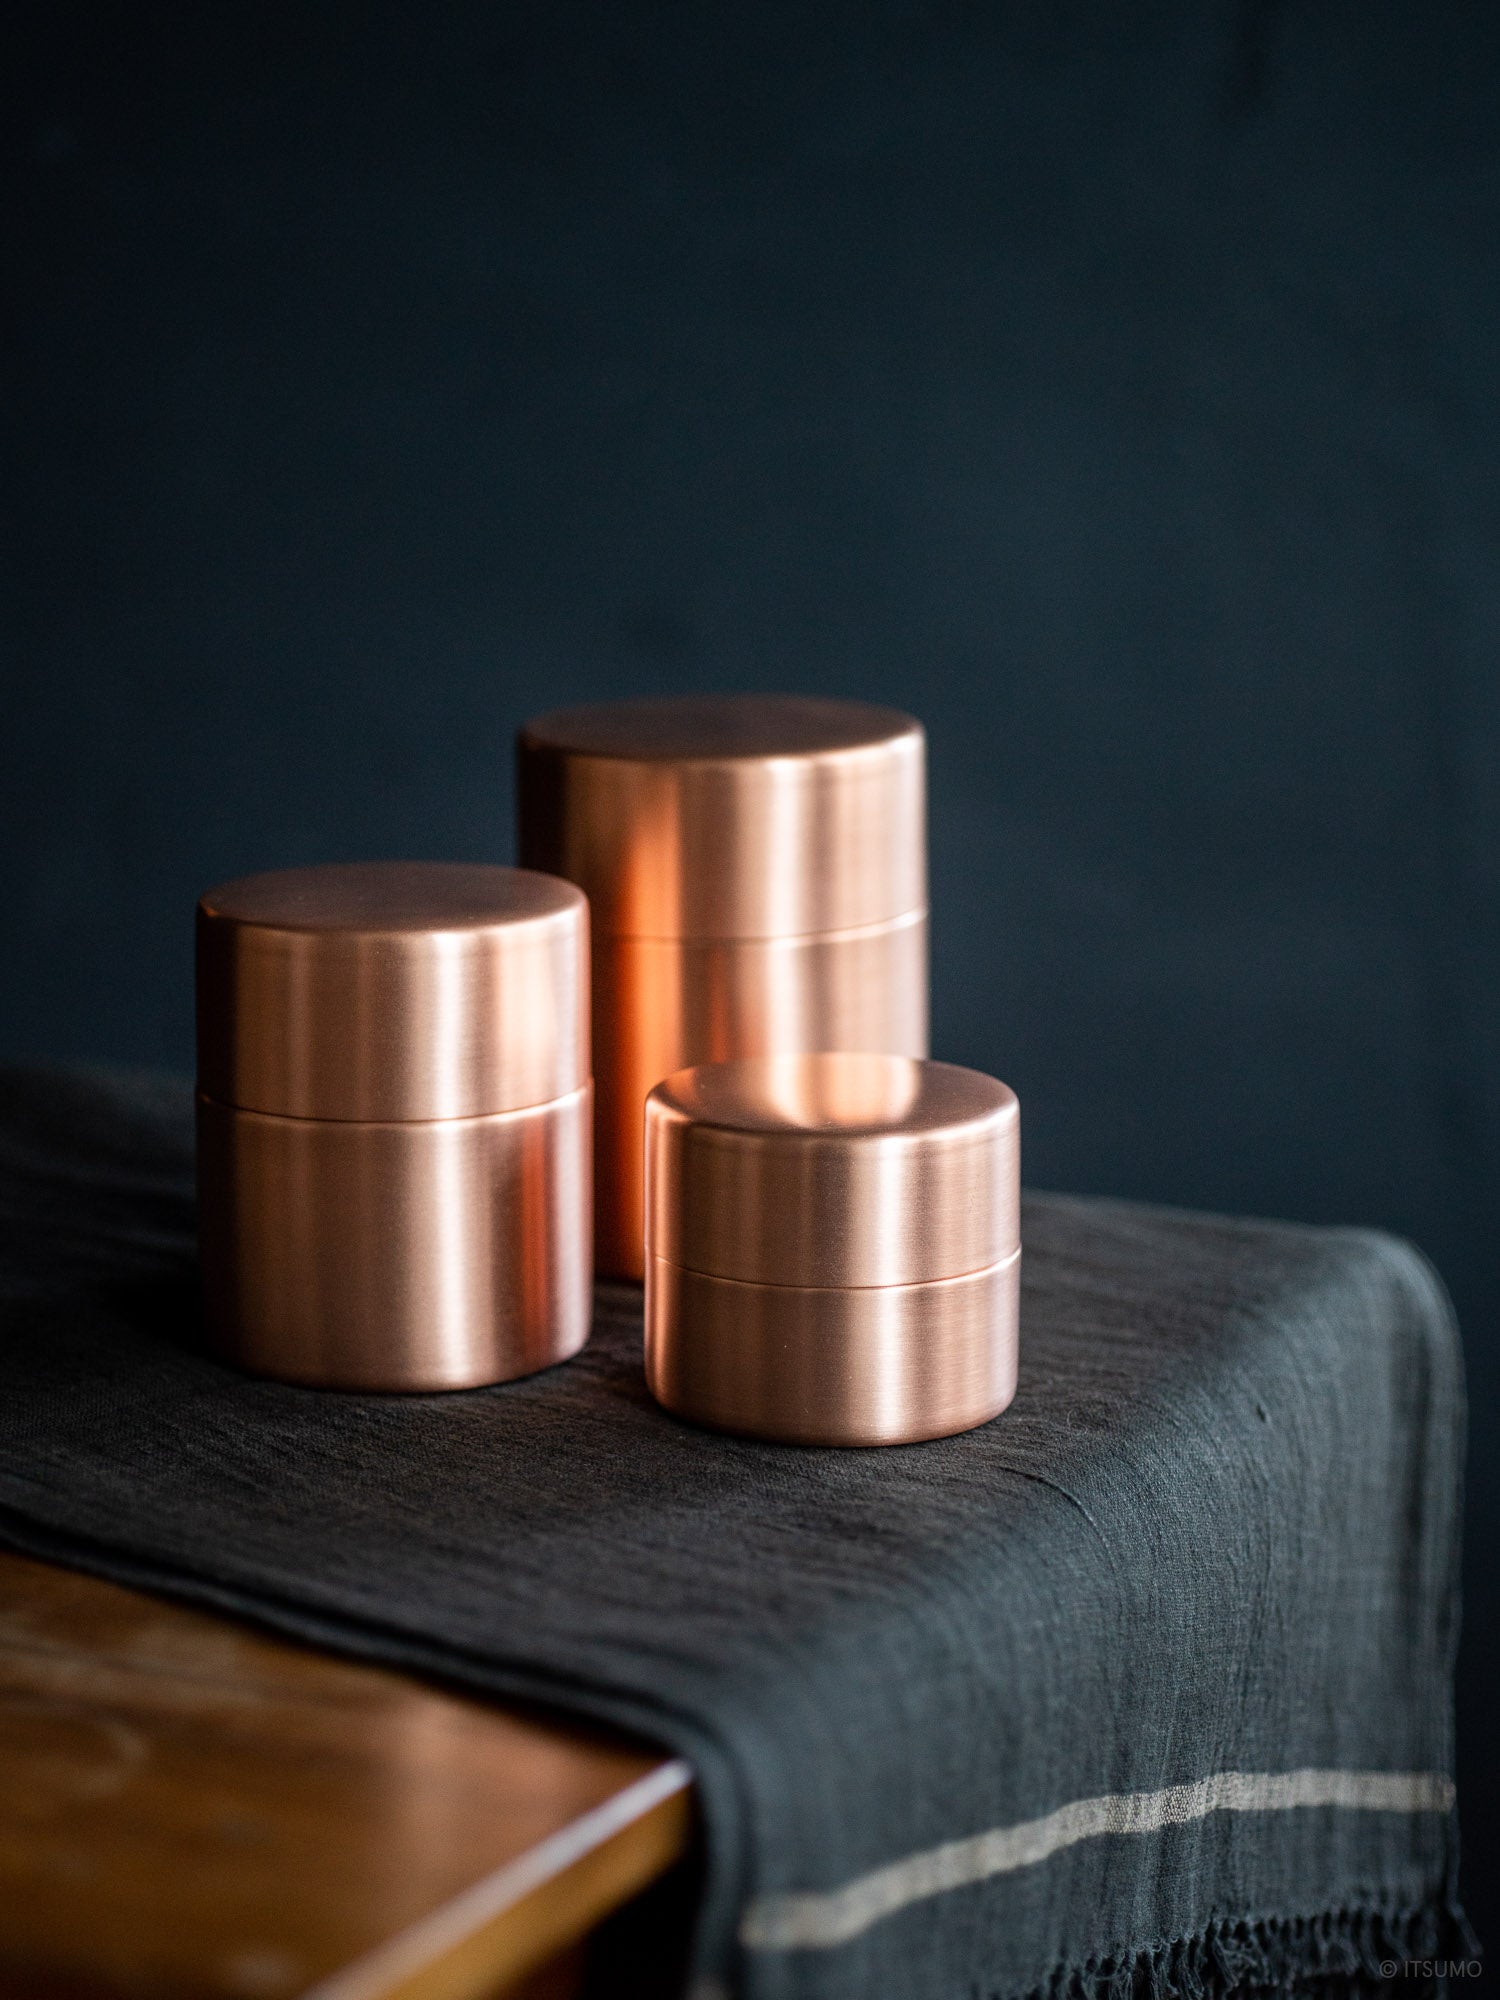  Azmaya copper tea canisters in three sizes: Small, Medium and Large